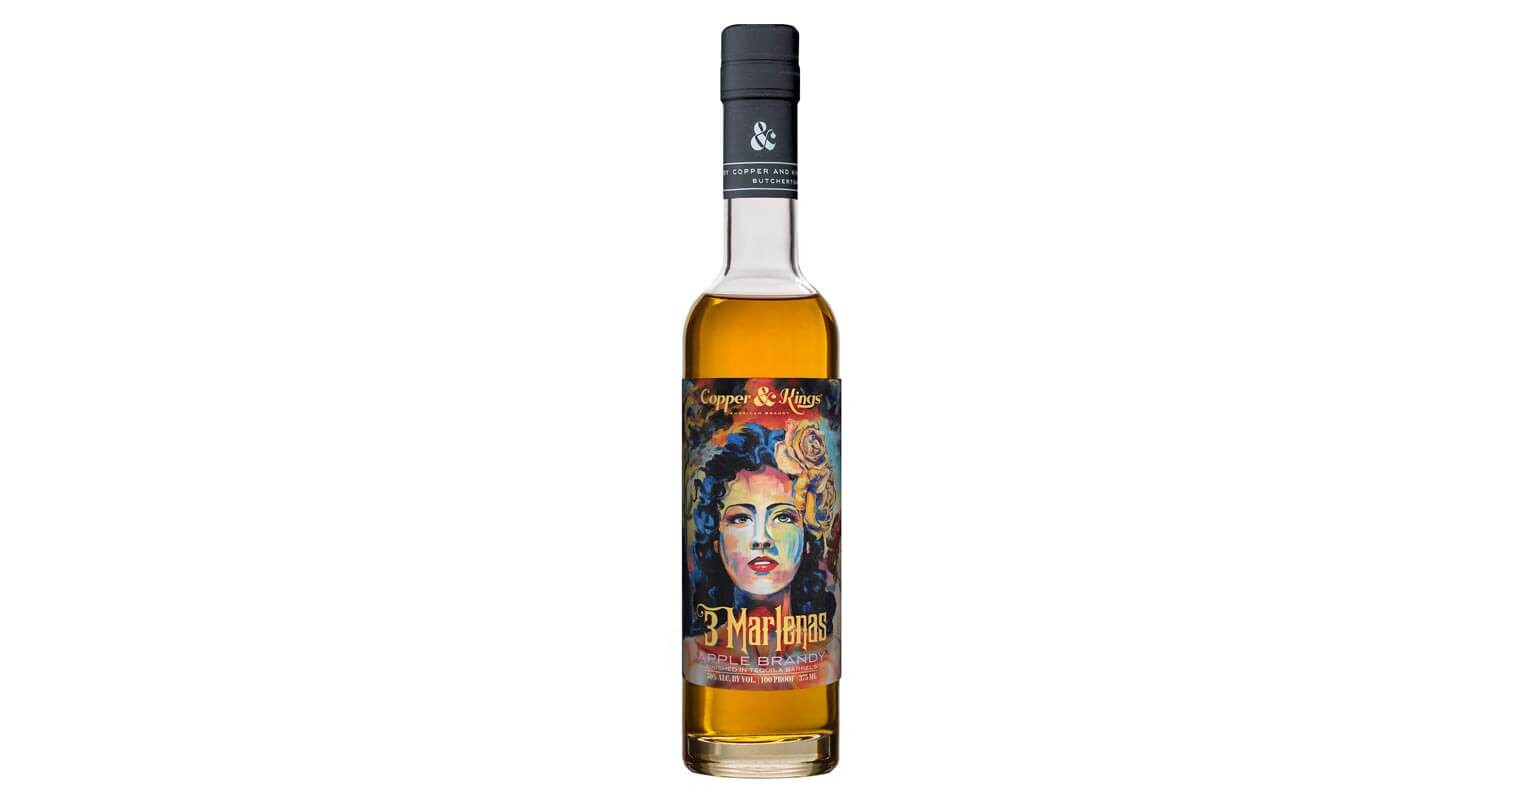 Copper & Kings Launches '3 Marlenas' Tequila Barrel Aged Apple Brandy, featured image